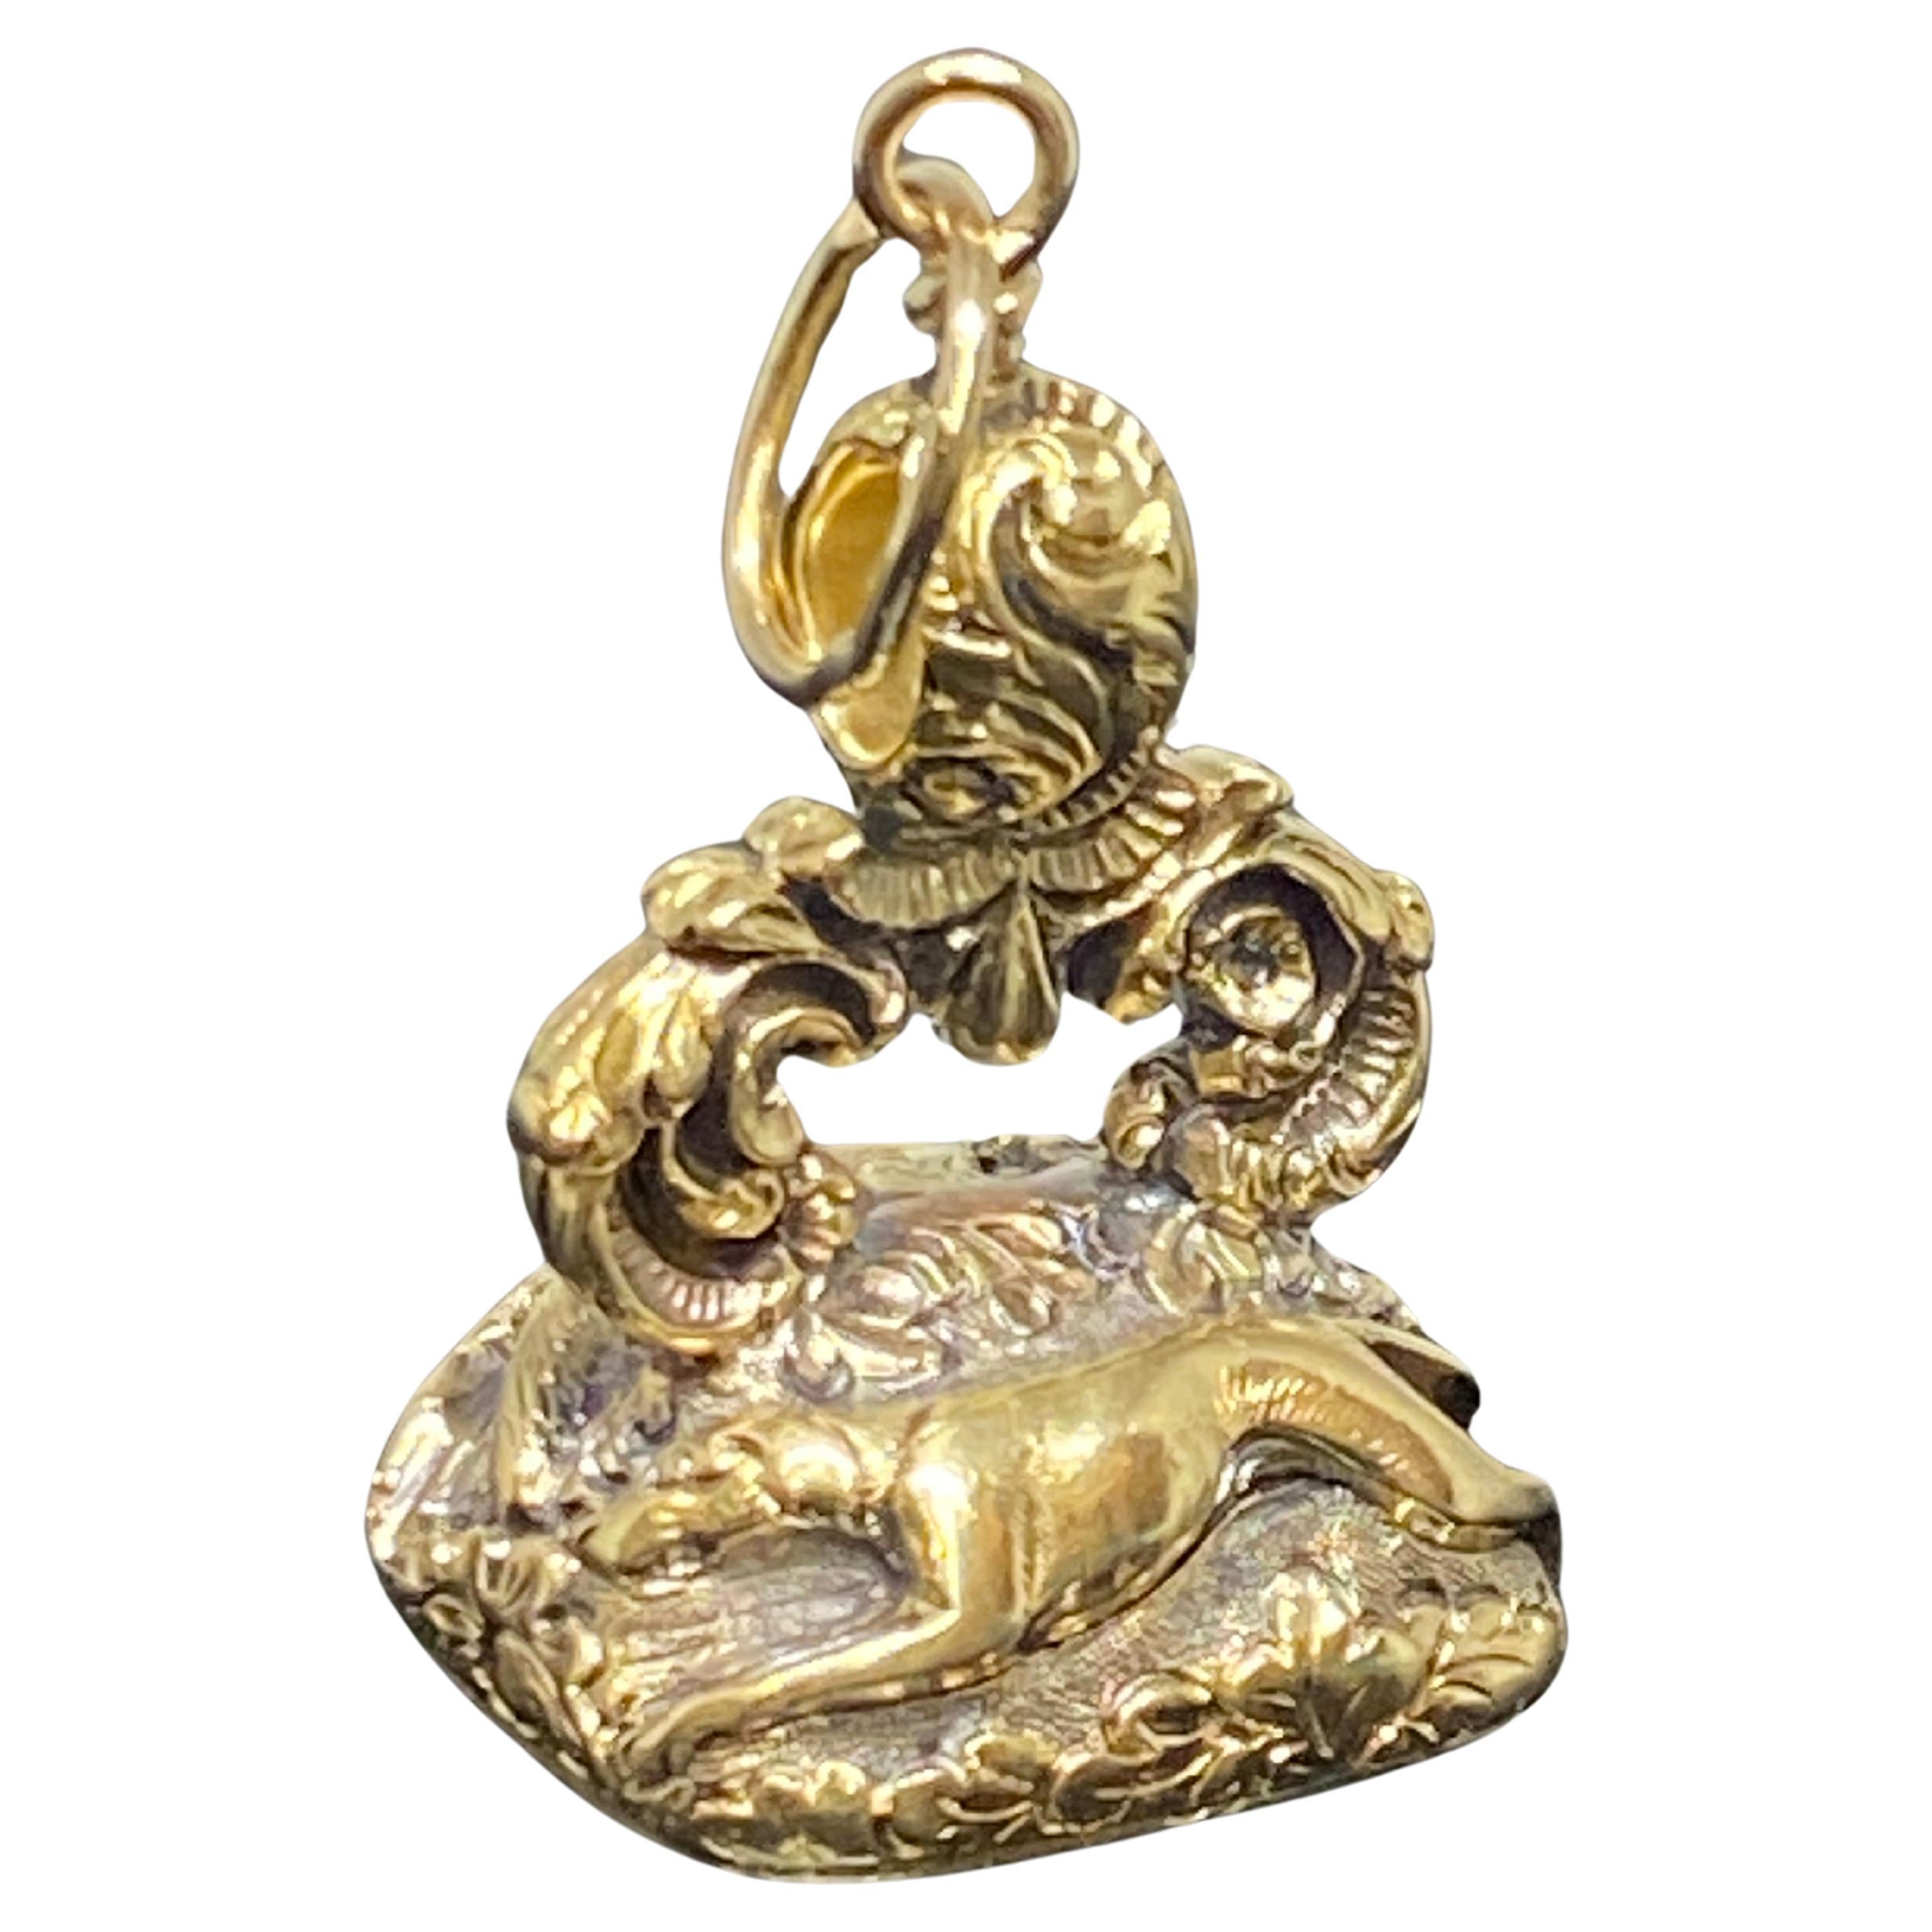 Beautiful antique Victorian fob (circa 1880s to 1900s) crafted in 14 karat yellow gold.  This charming fob features a fox on one side and a hound on the other chasing after another. The underside of the fob is engraved carnelian stone with detailed